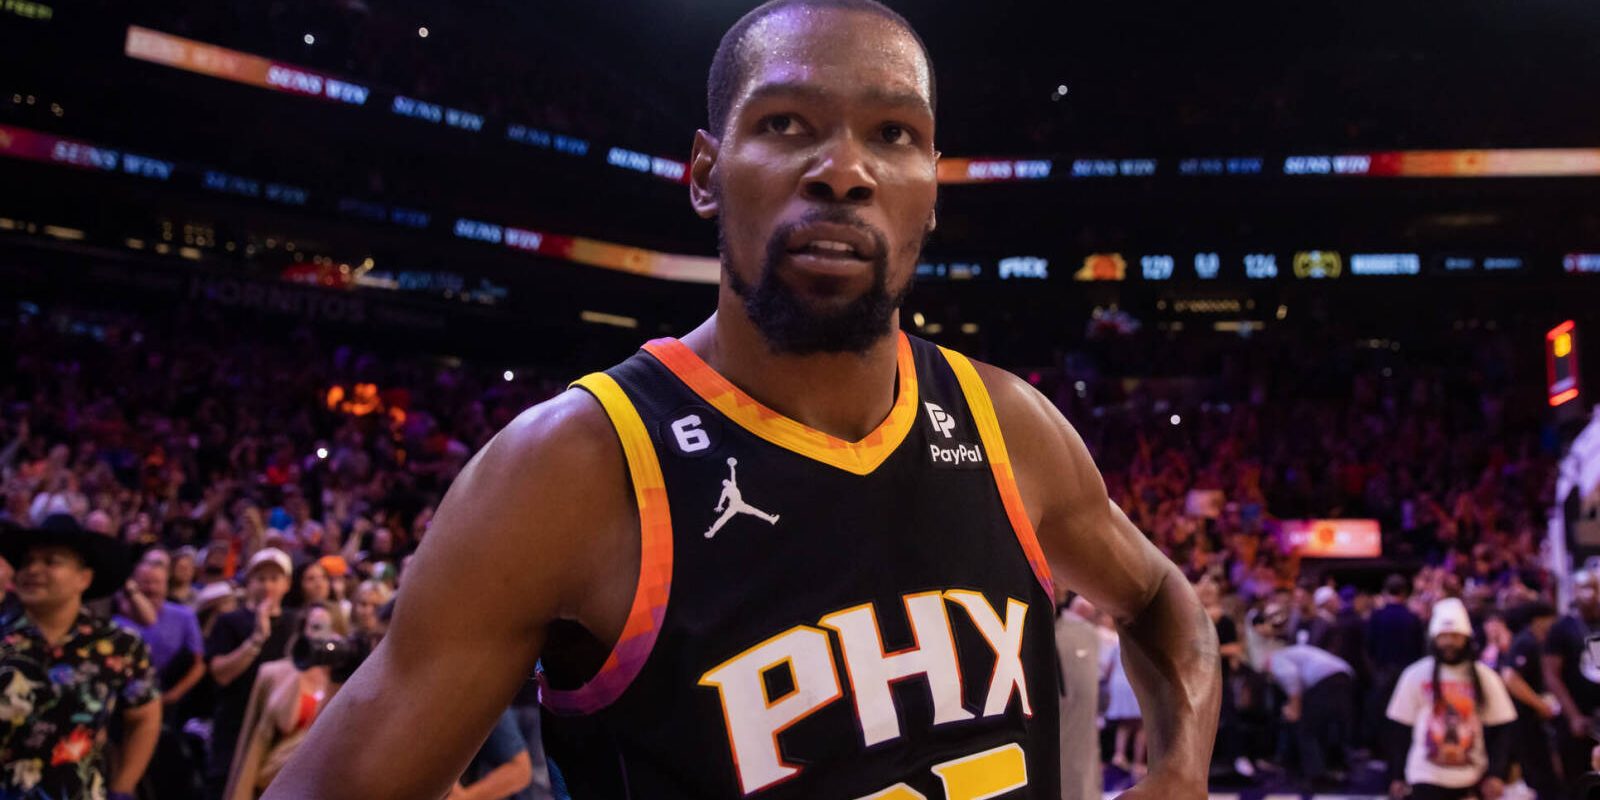 May 7, 2023; Phoenix, Arizona, USA; Phoenix Suns forward Kevin Durant (35) after defeating the Denver Nuggets during game four of the 2023 NBA playoffs at Footprint Center. Mandatory Credit: Mark J. Rebilas-USA TODAY Sports